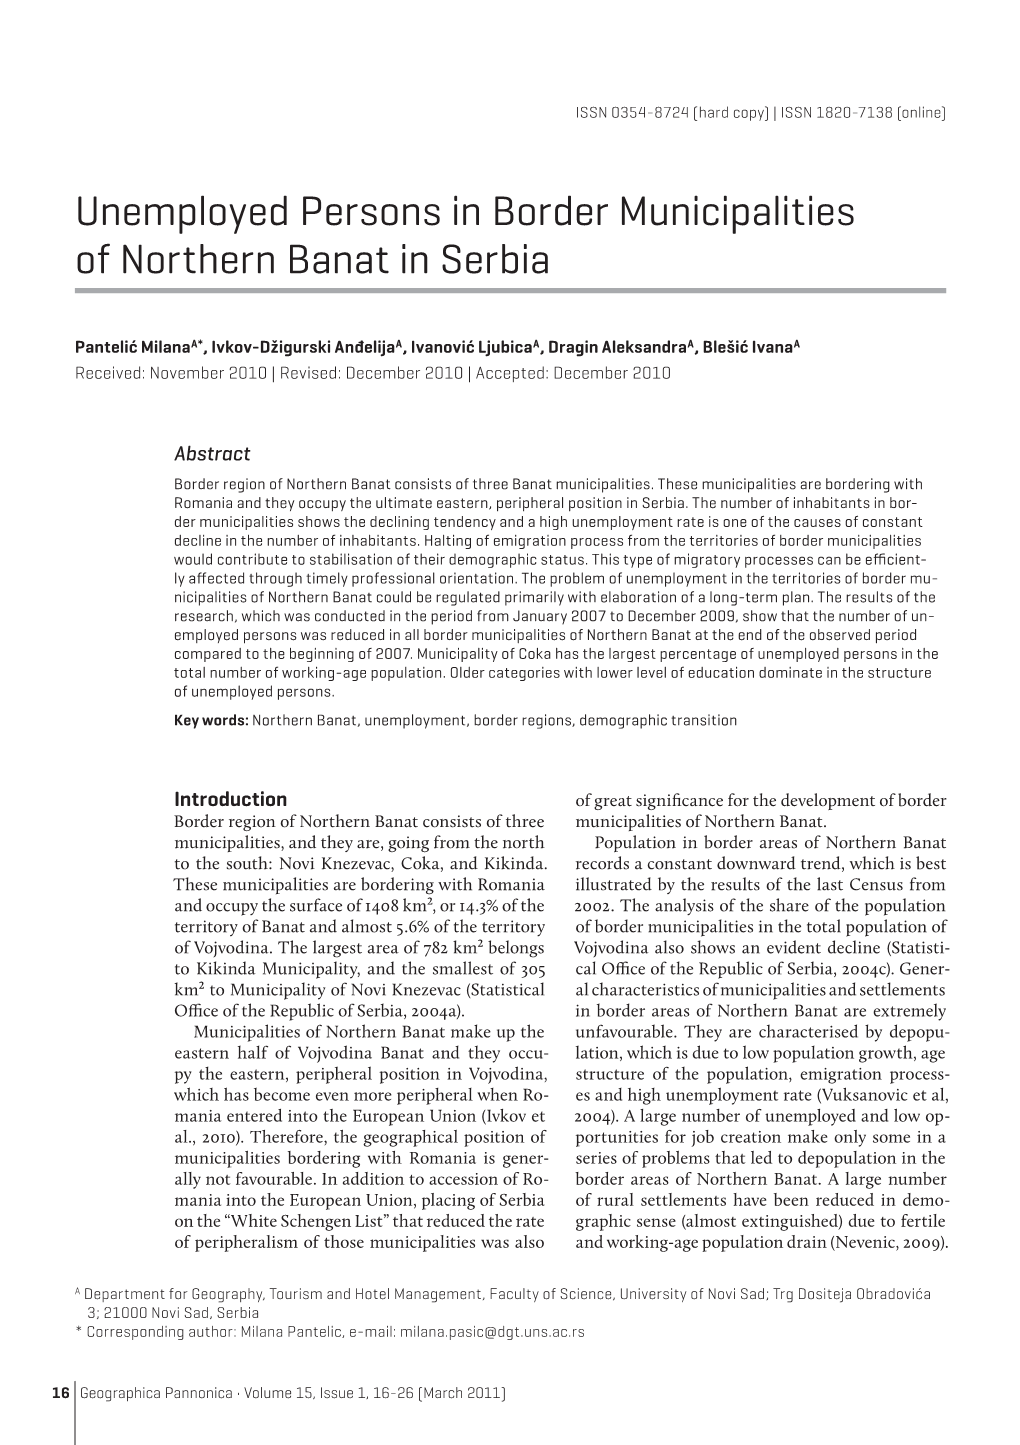 Unemployed Persons in Border Municipalities of Northern Banat in Serbia